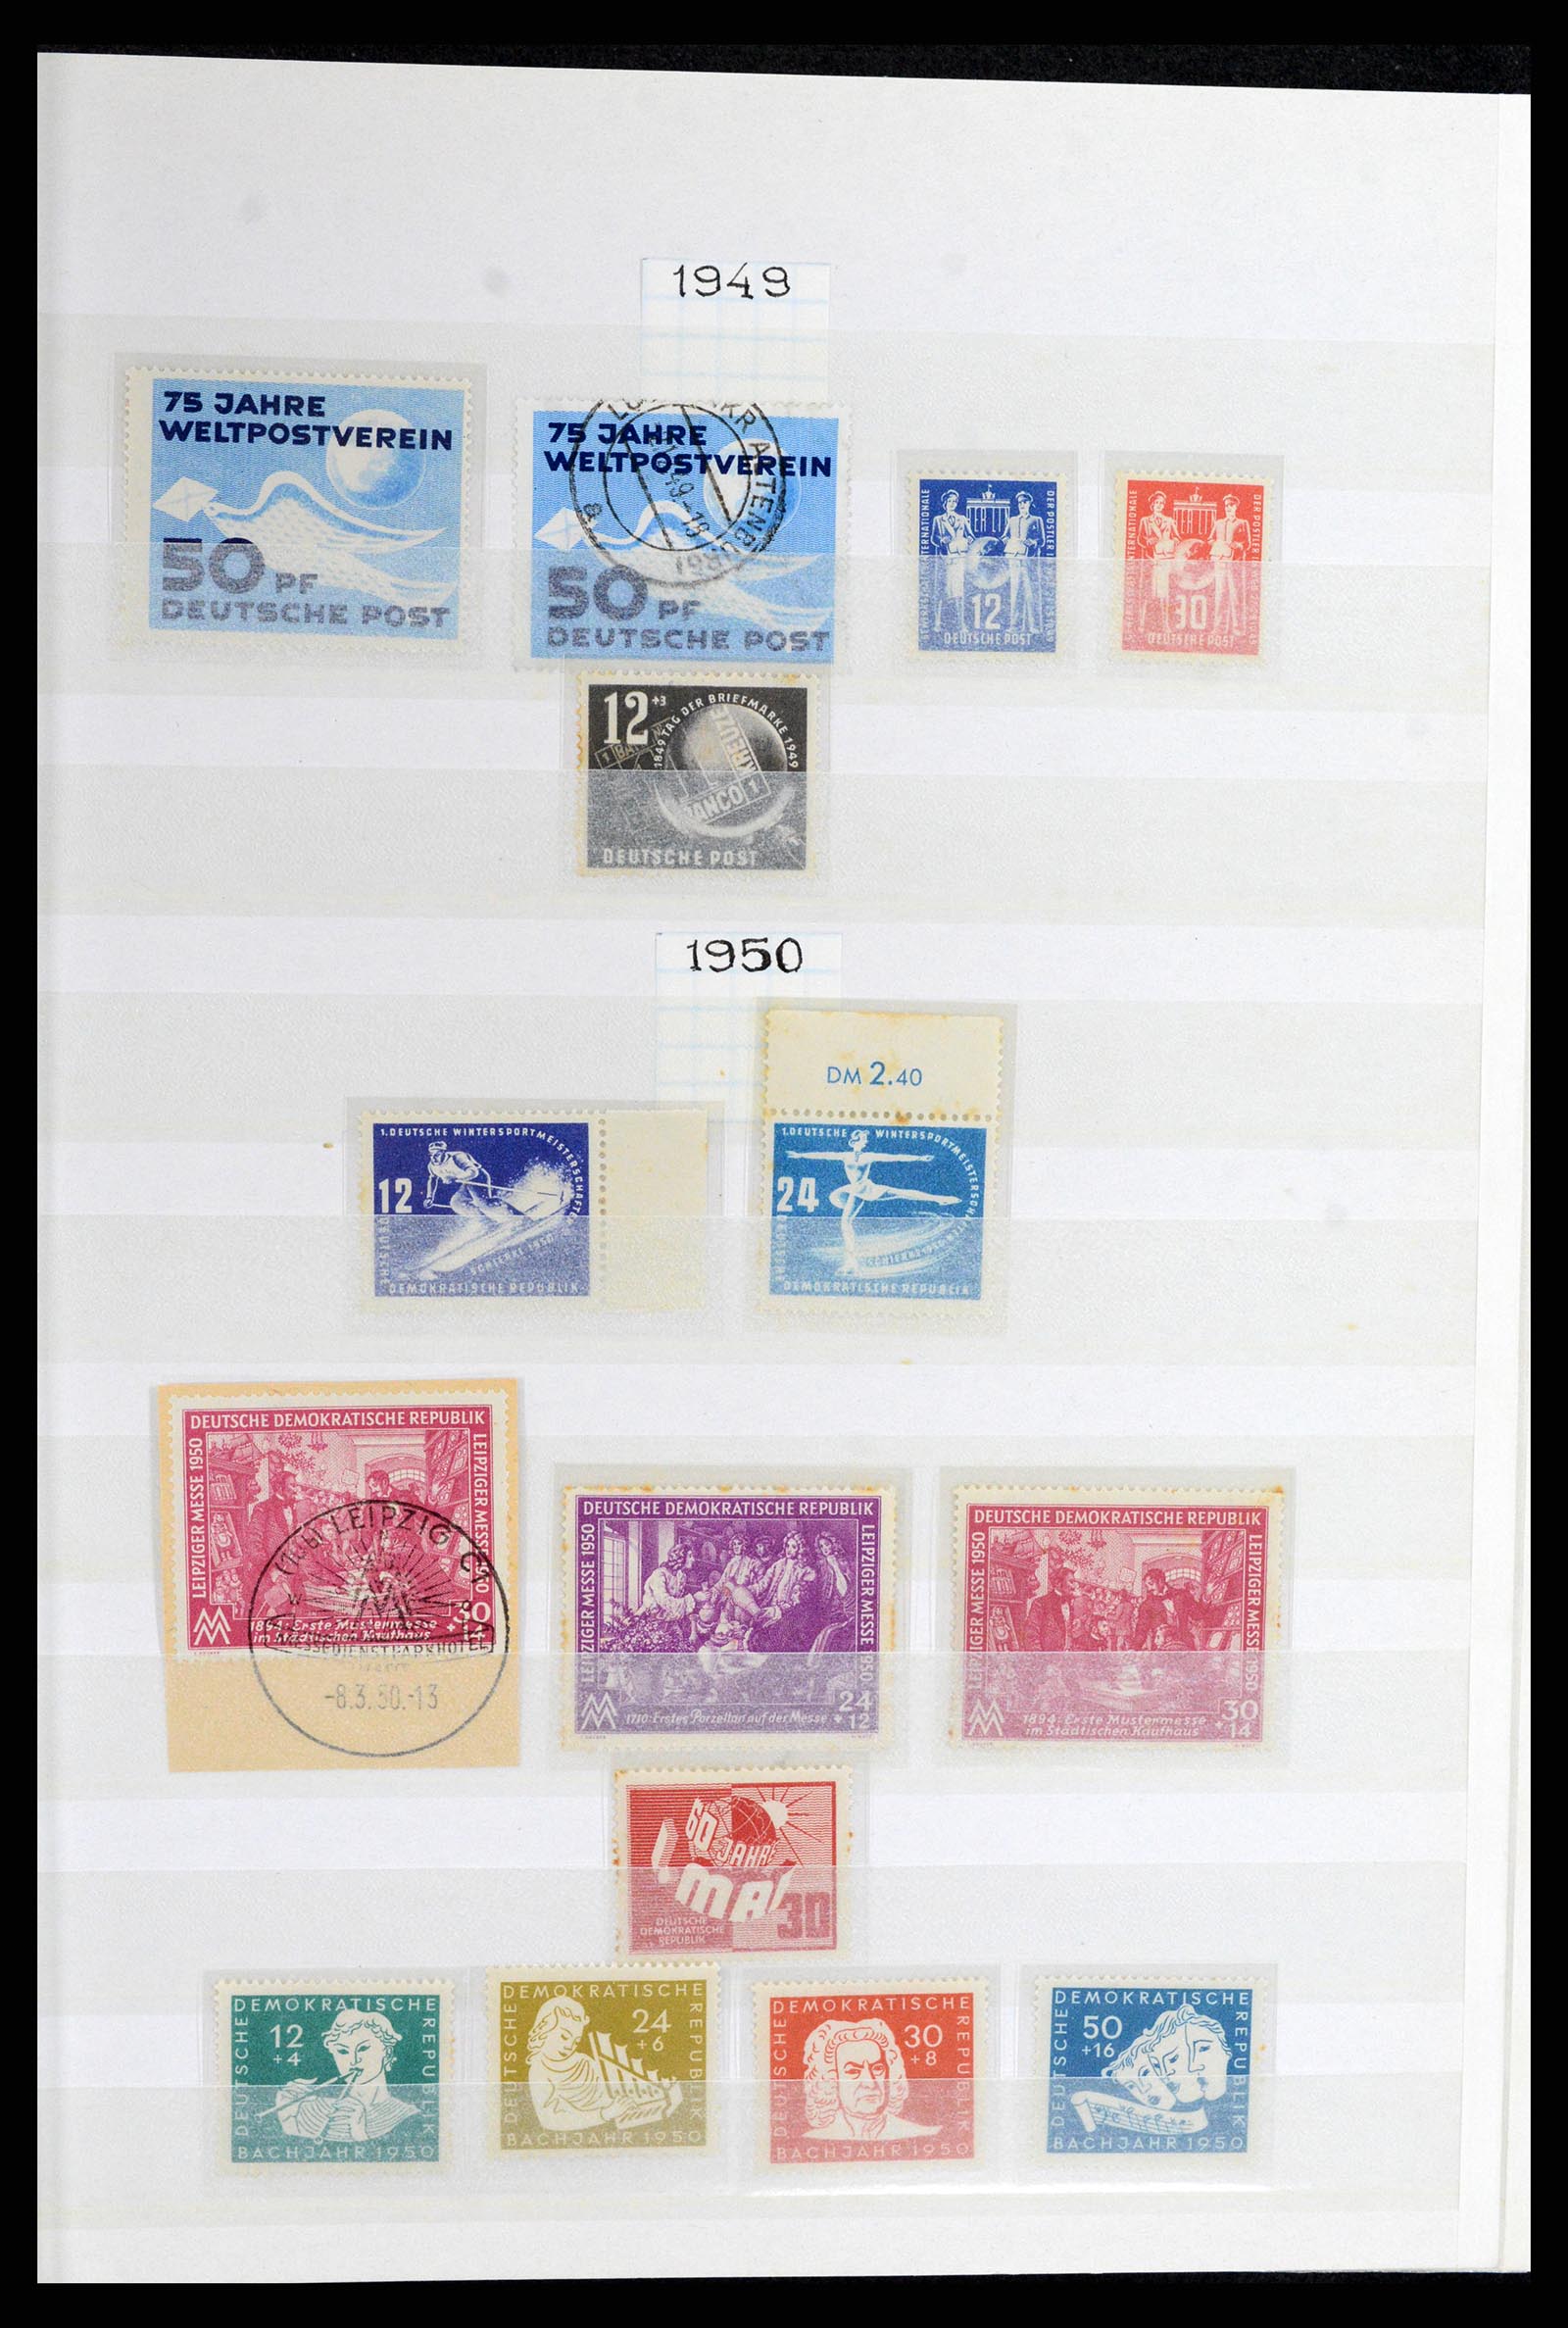 37501 001 - Stamp collection 37501 GDR 1949-1990.